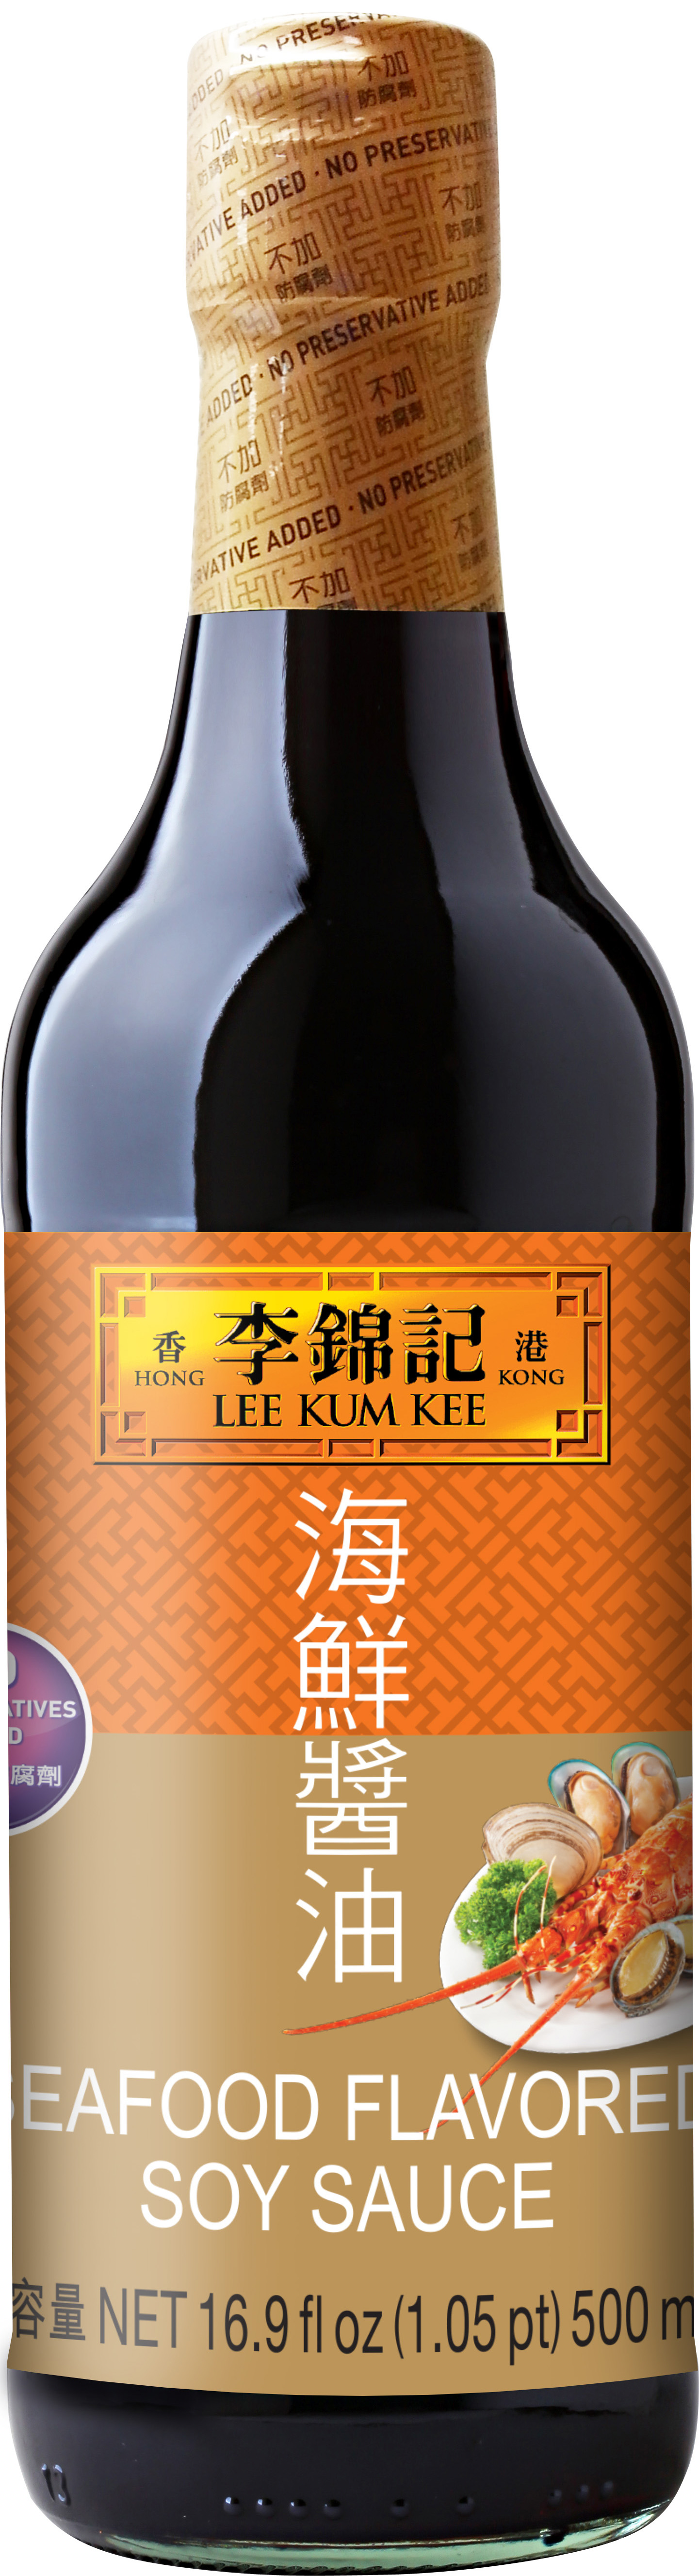 Seafood Flavored Soy Sauce, 16.9oz